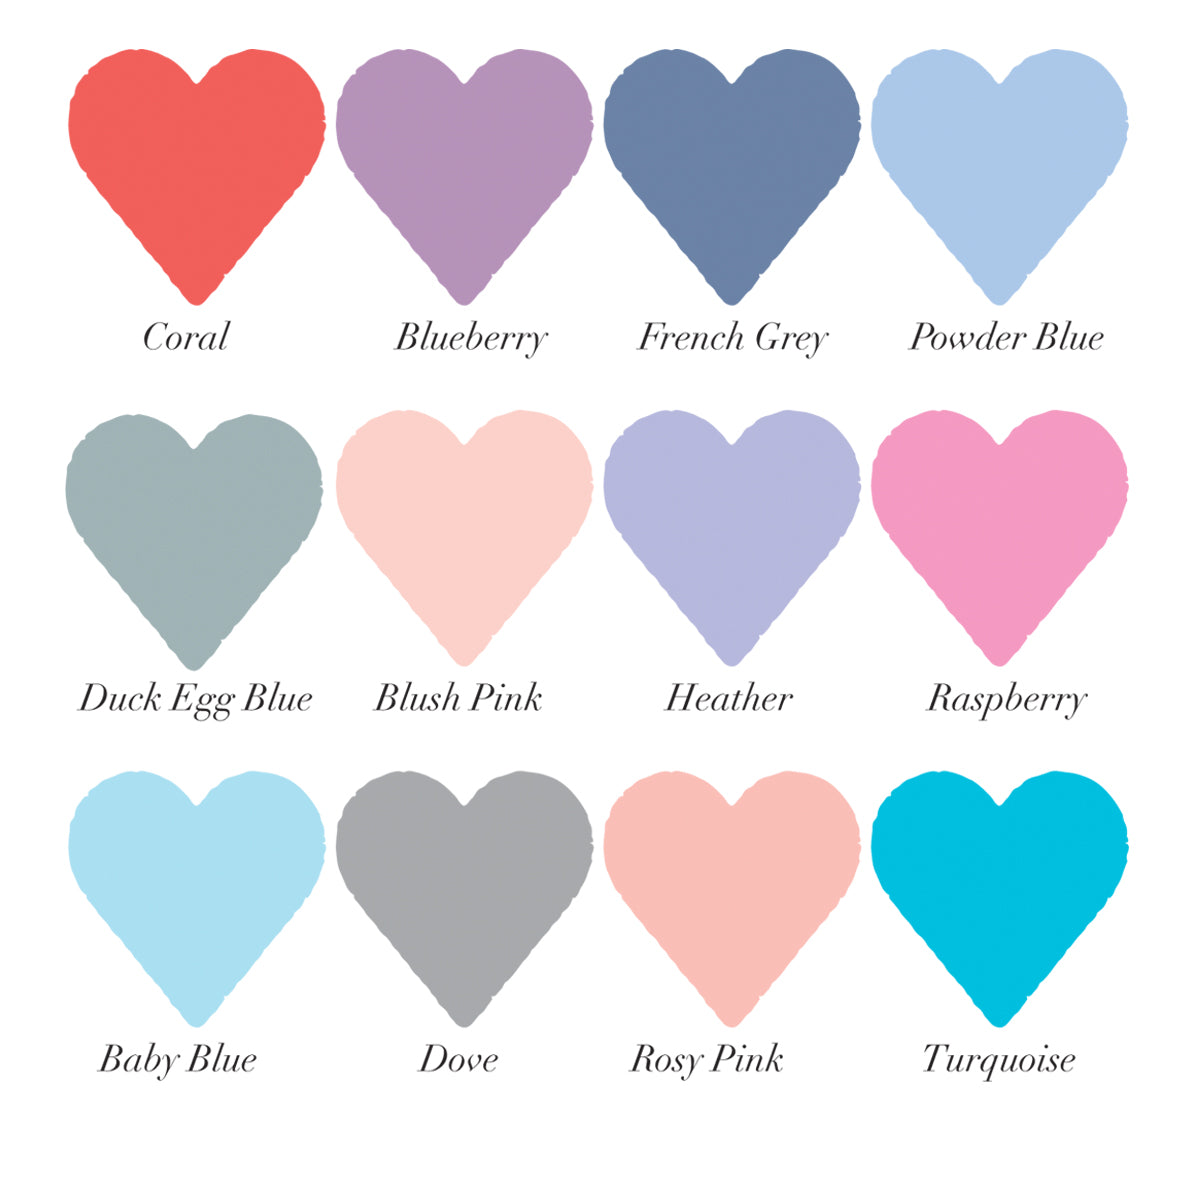 colour swatches in heart shapes